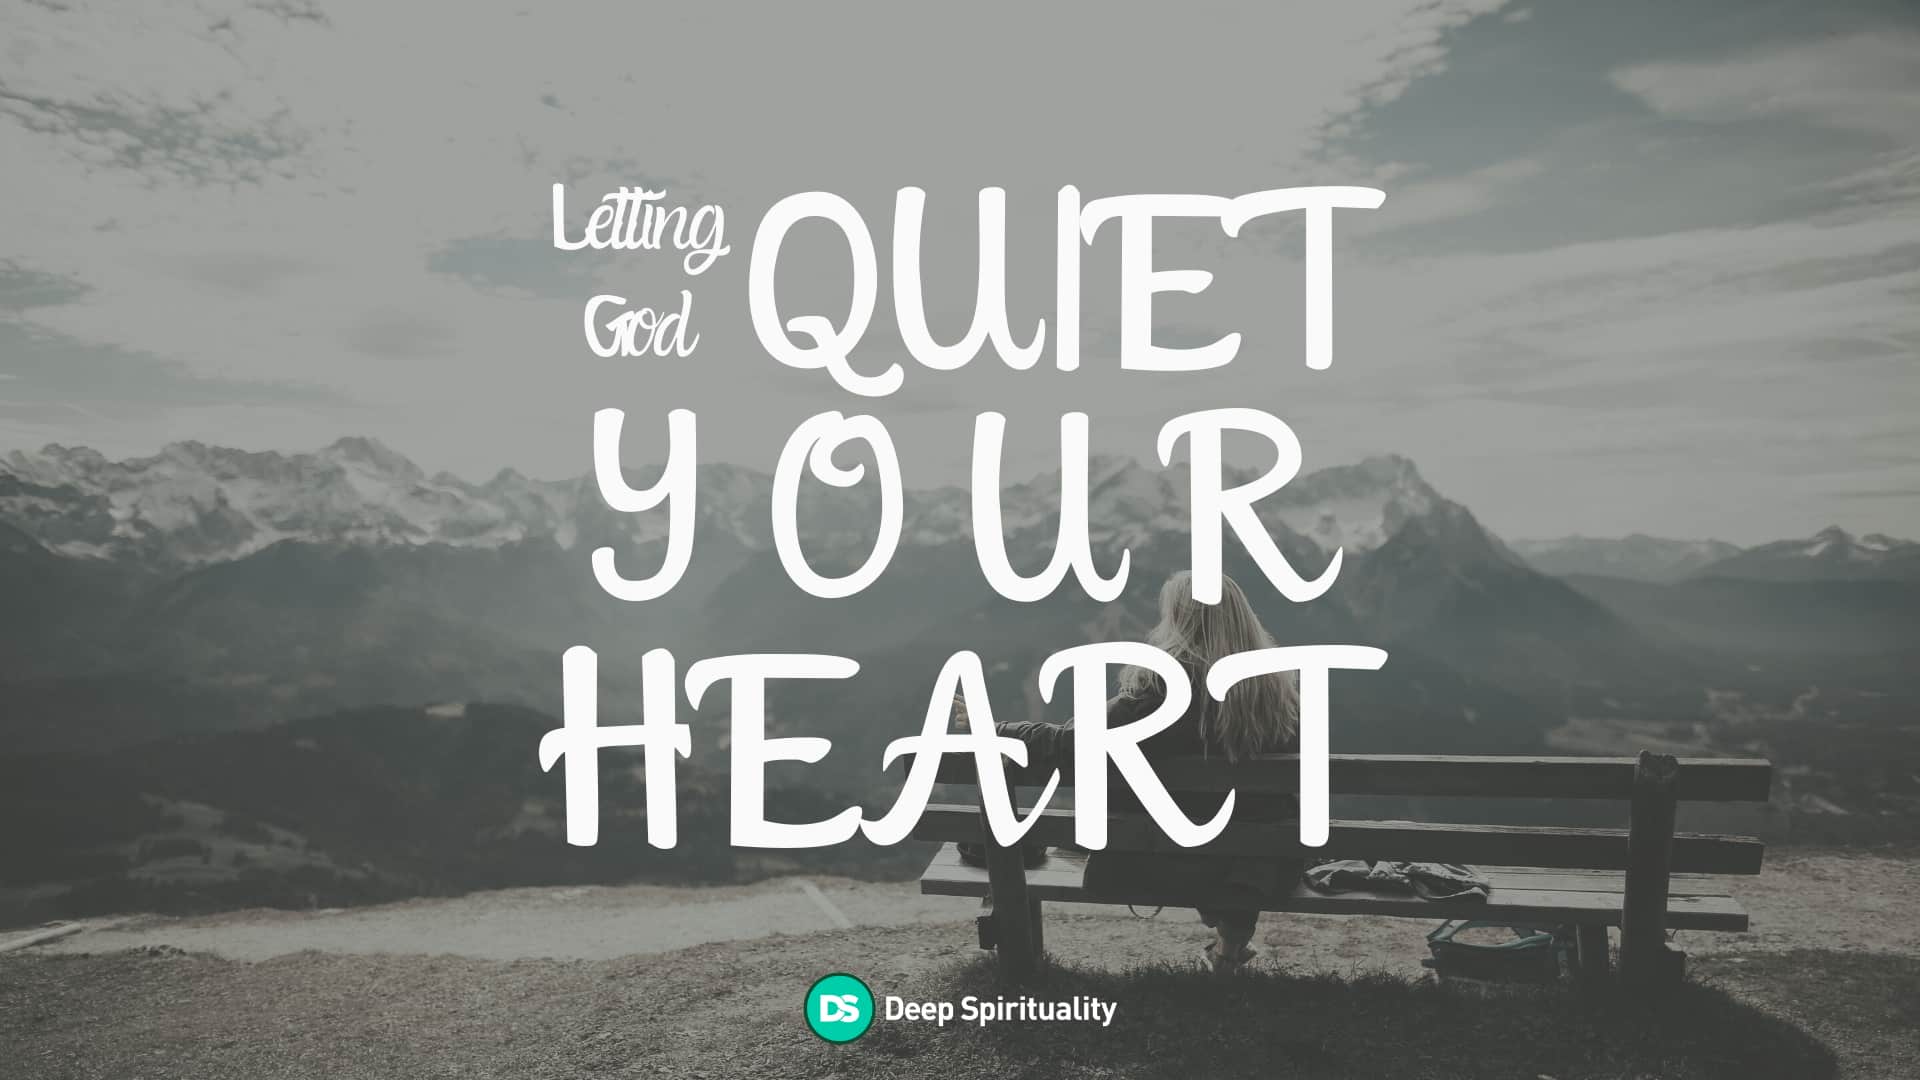 The Ultimate Guide to Letting God Quiet Your Heart 21